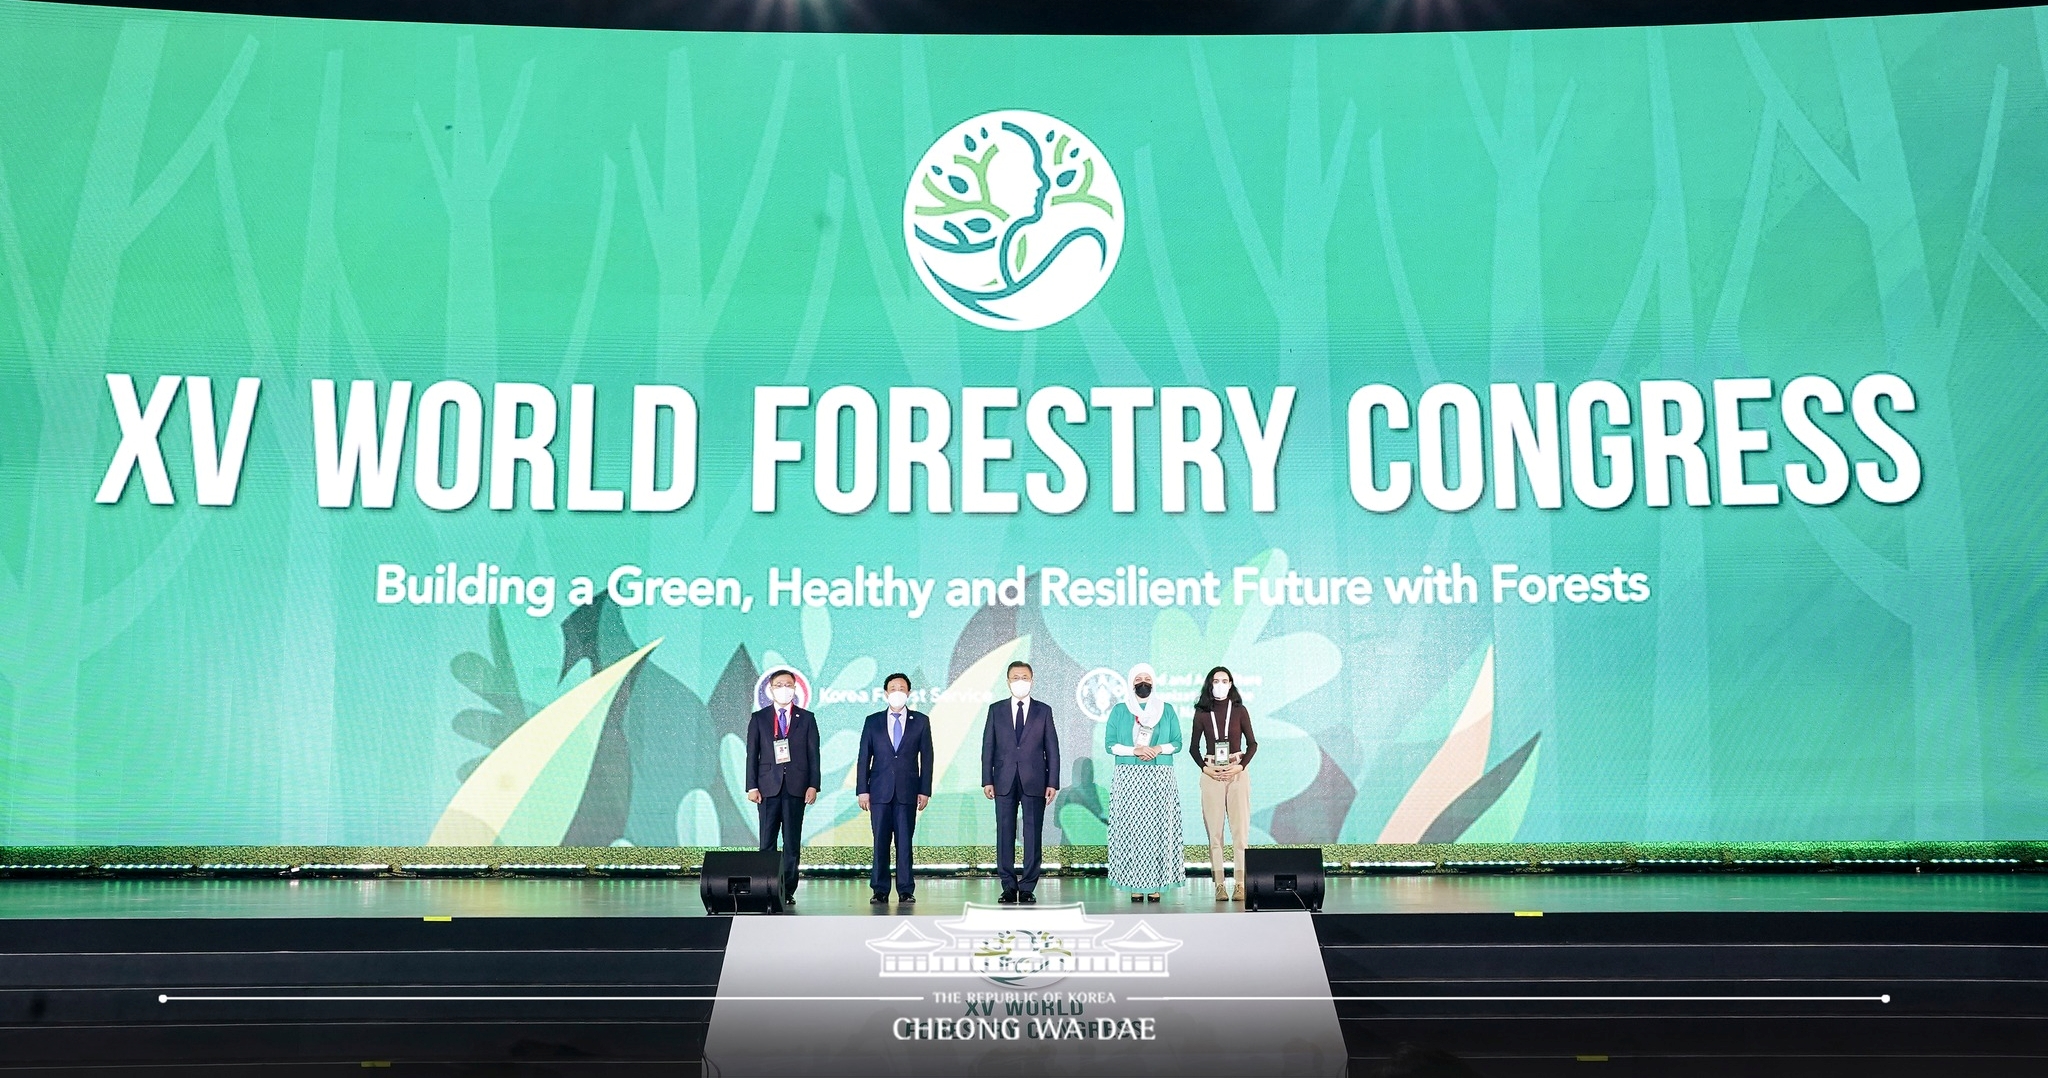 President Moon Jae-in on May 2 poses for photos at the opening ceremony of the 15th World Forestry Congress at the Seoul COEX in the capital's Gangnam-gu District. From left are Korea Forest Service Minister Choi Byeong-Am, United Nations Food and Agriculture Organization Director-General Qu Dongyu, President Moon, Jordanian Princess Basma bint Ali and International Forestry Students' Association President Magdalena Jovanovic. (Cheong Wa Dae's Facebook page)